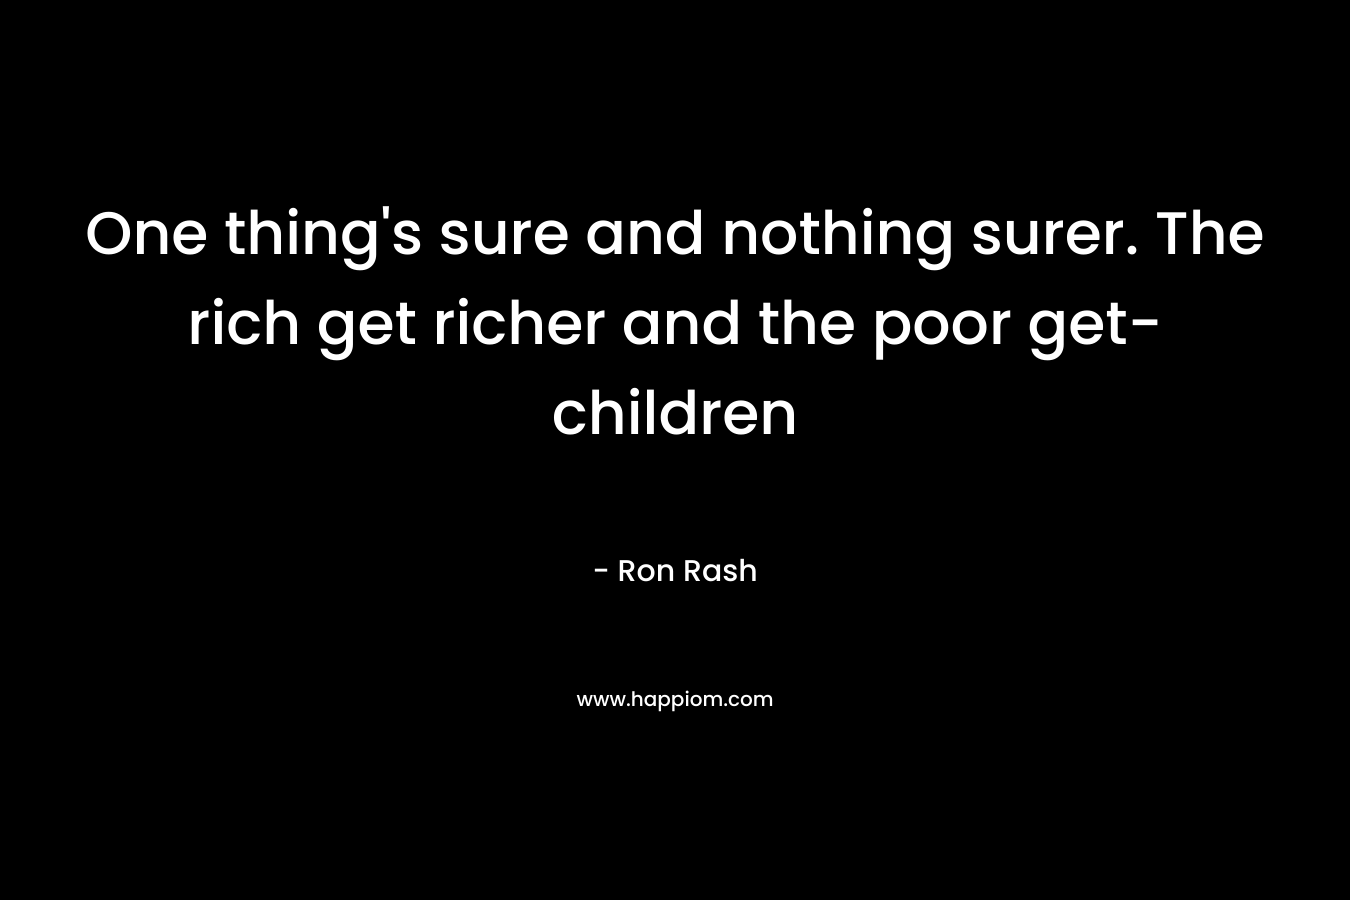 One thing’s sure and nothing surer. The rich get richer and the poor get- children – Ron Rash